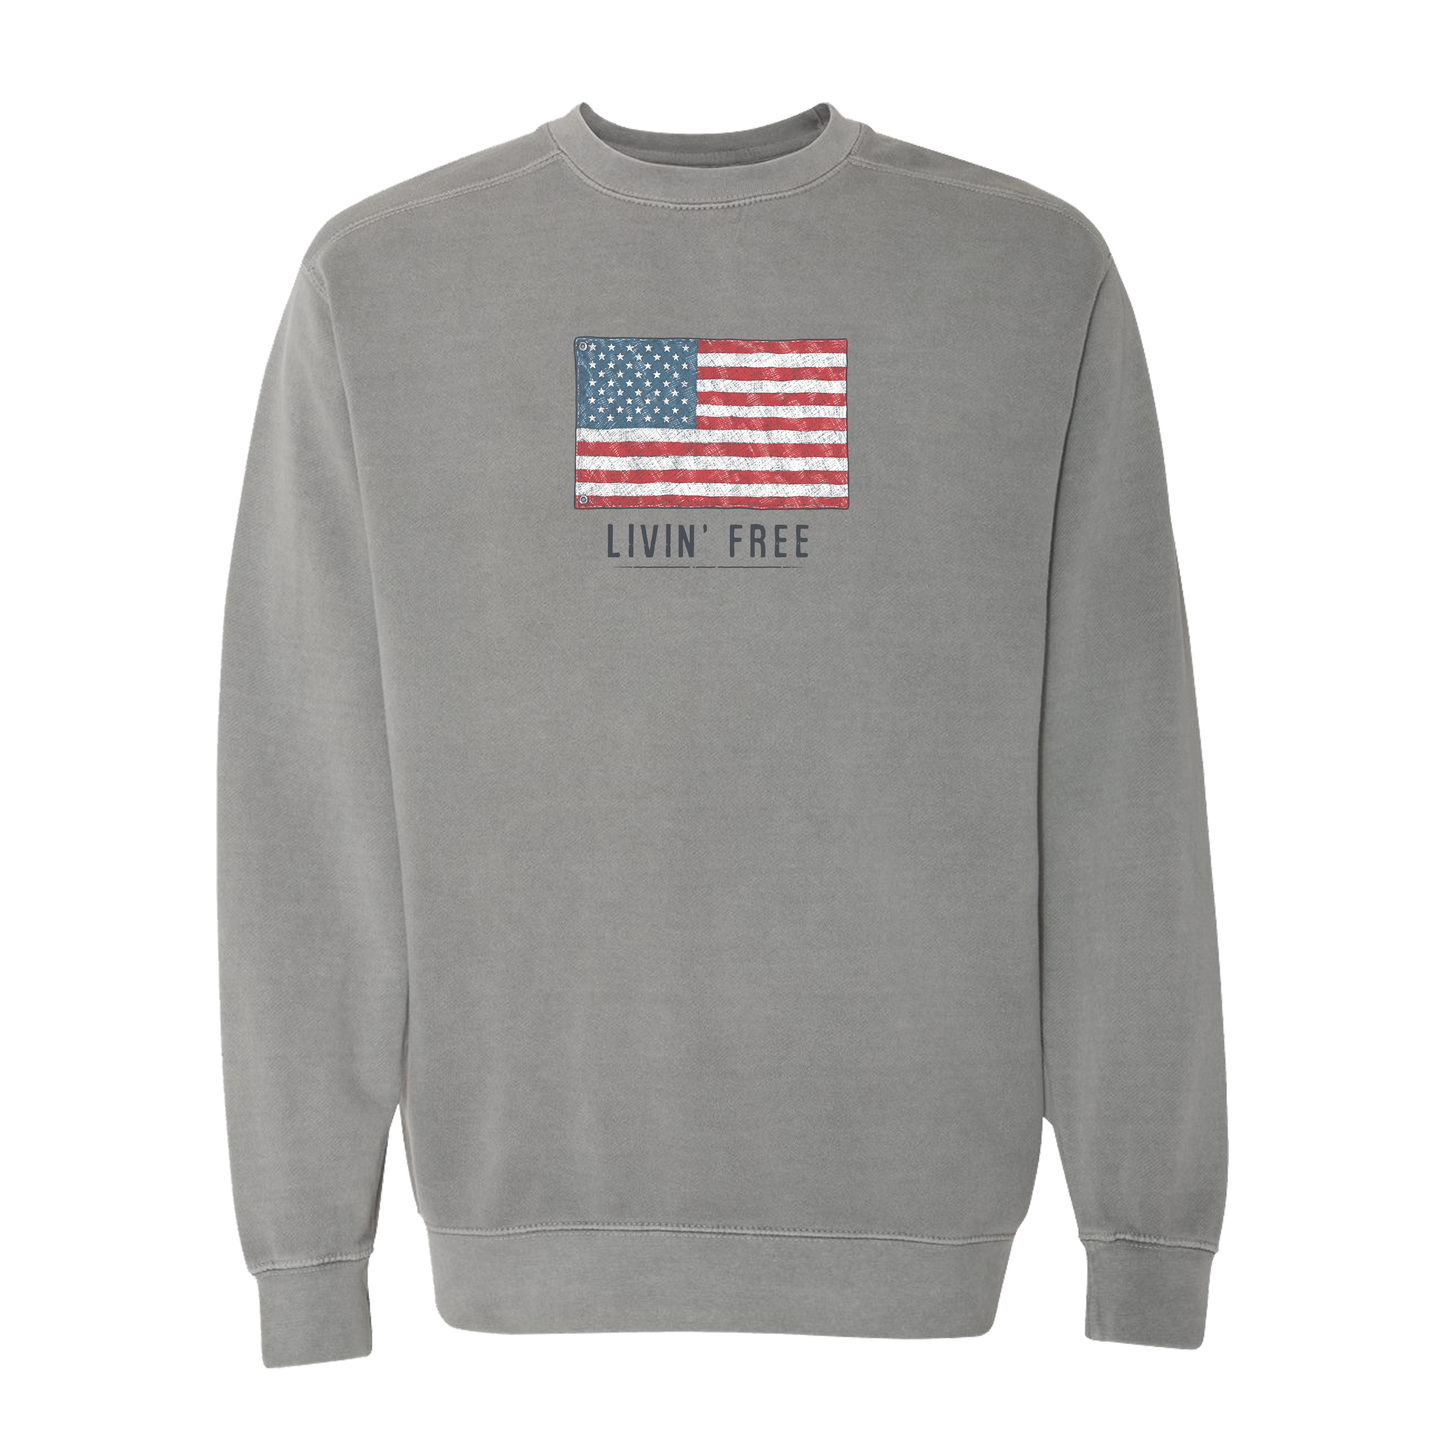 Livin' Free in the USA - Grey